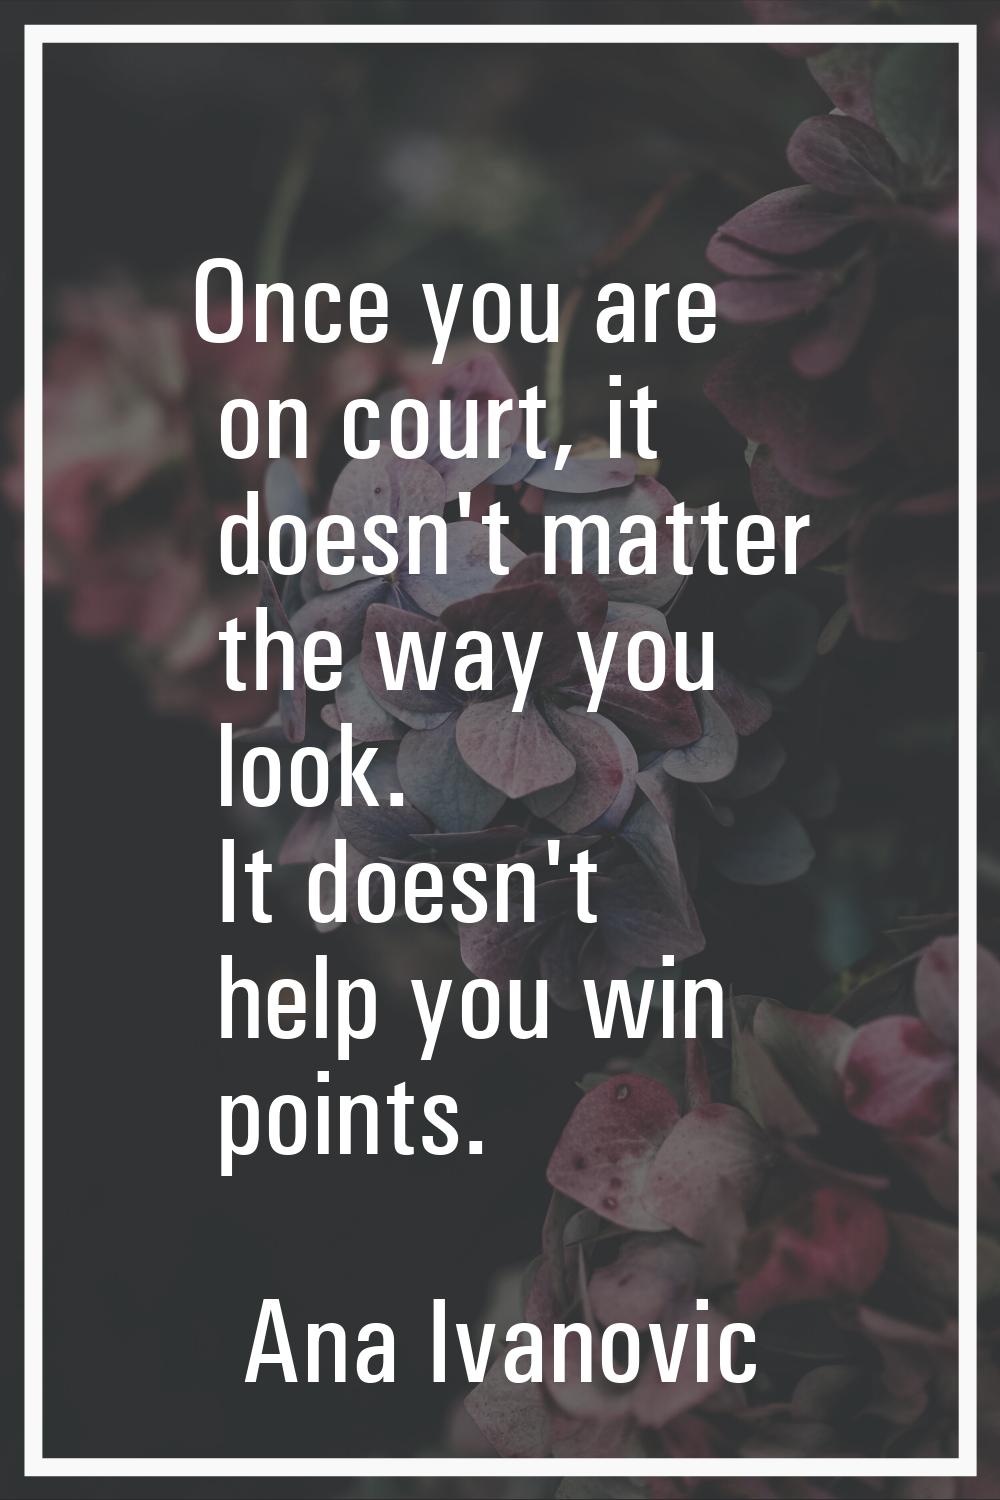 Once you are on court, it doesn't matter the way you look. It doesn't help you win points.